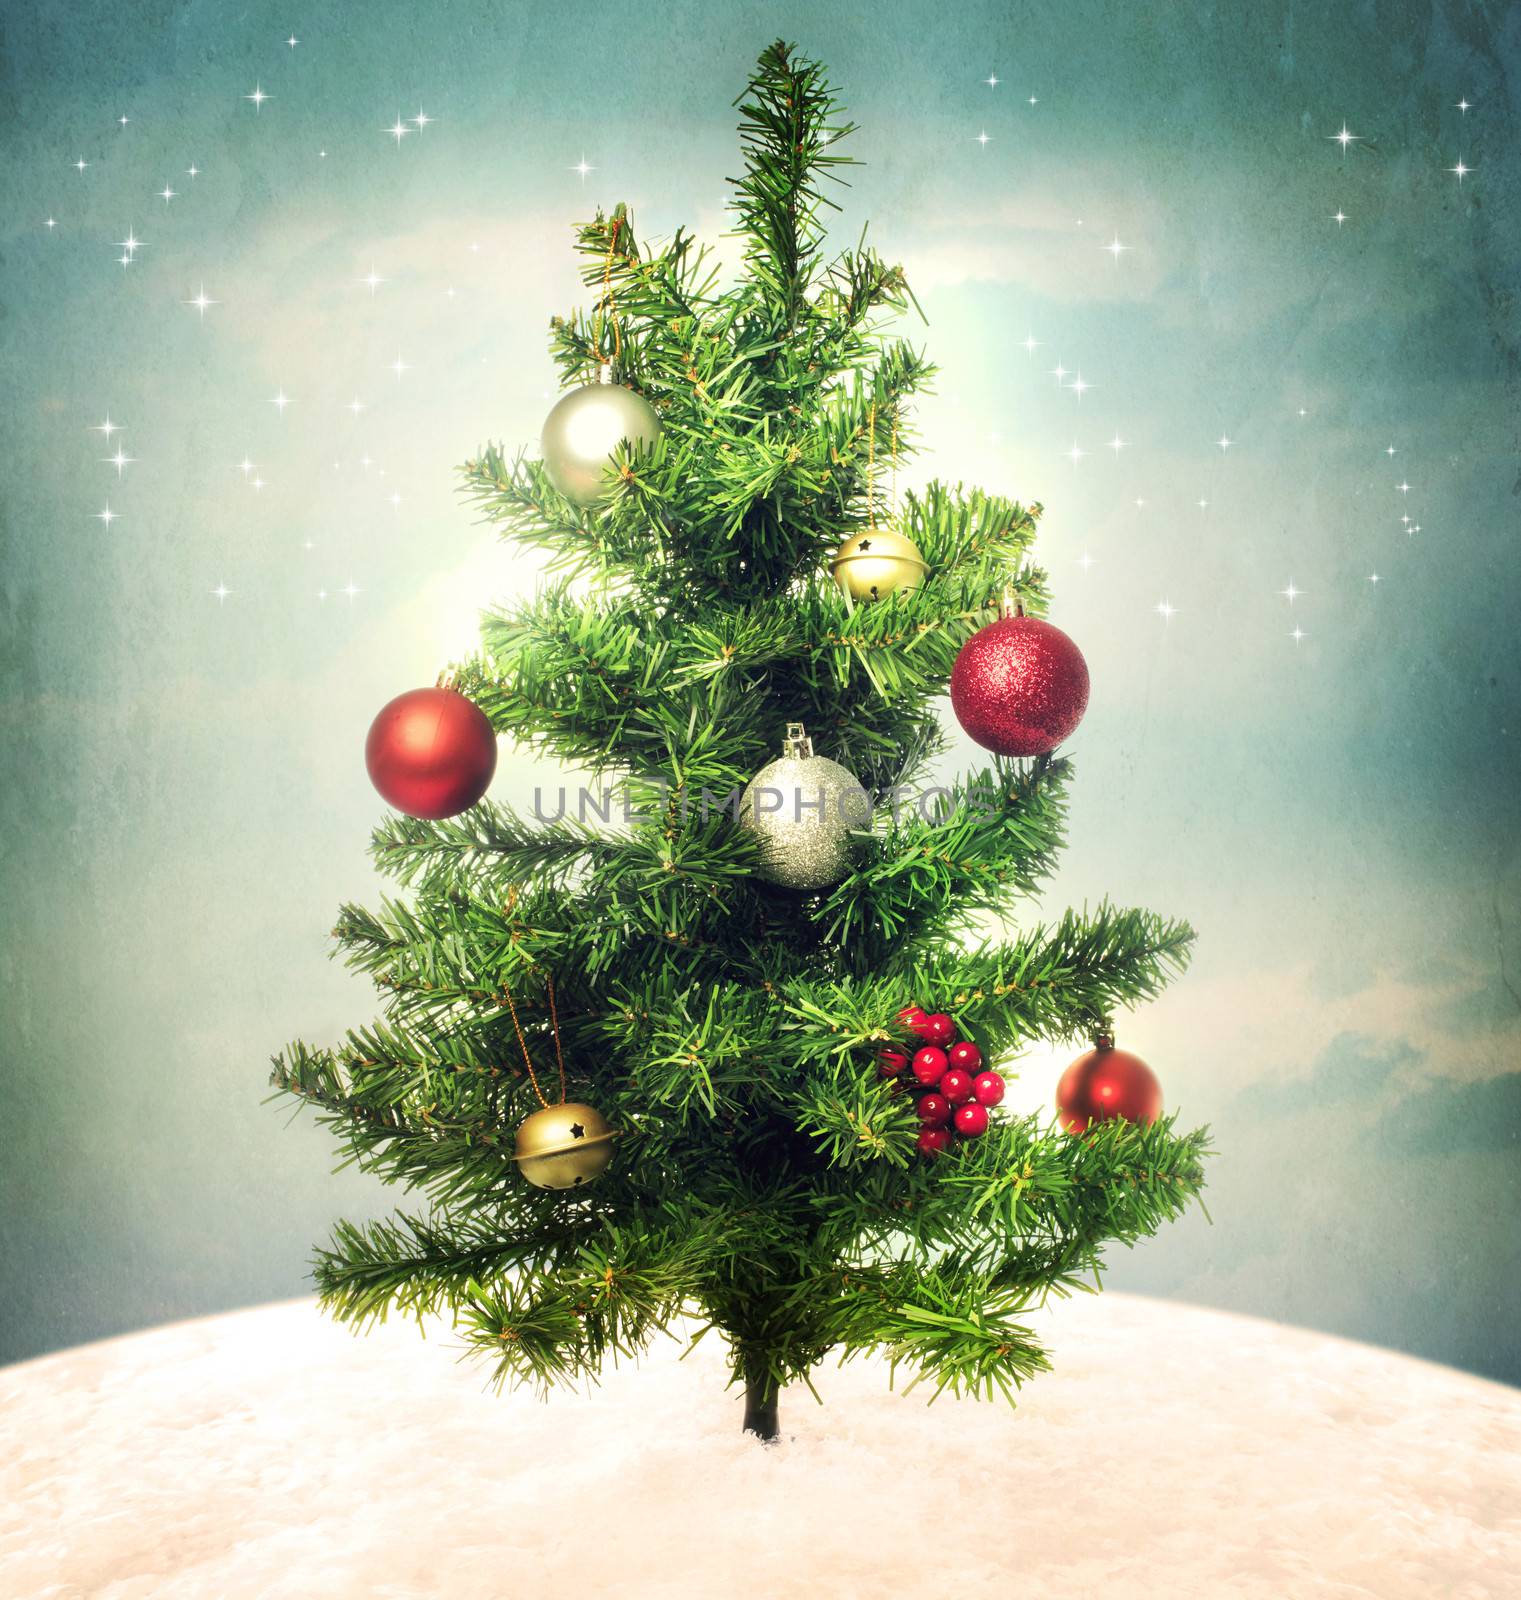 Decorated Christmas tree on hilltop by melpomene